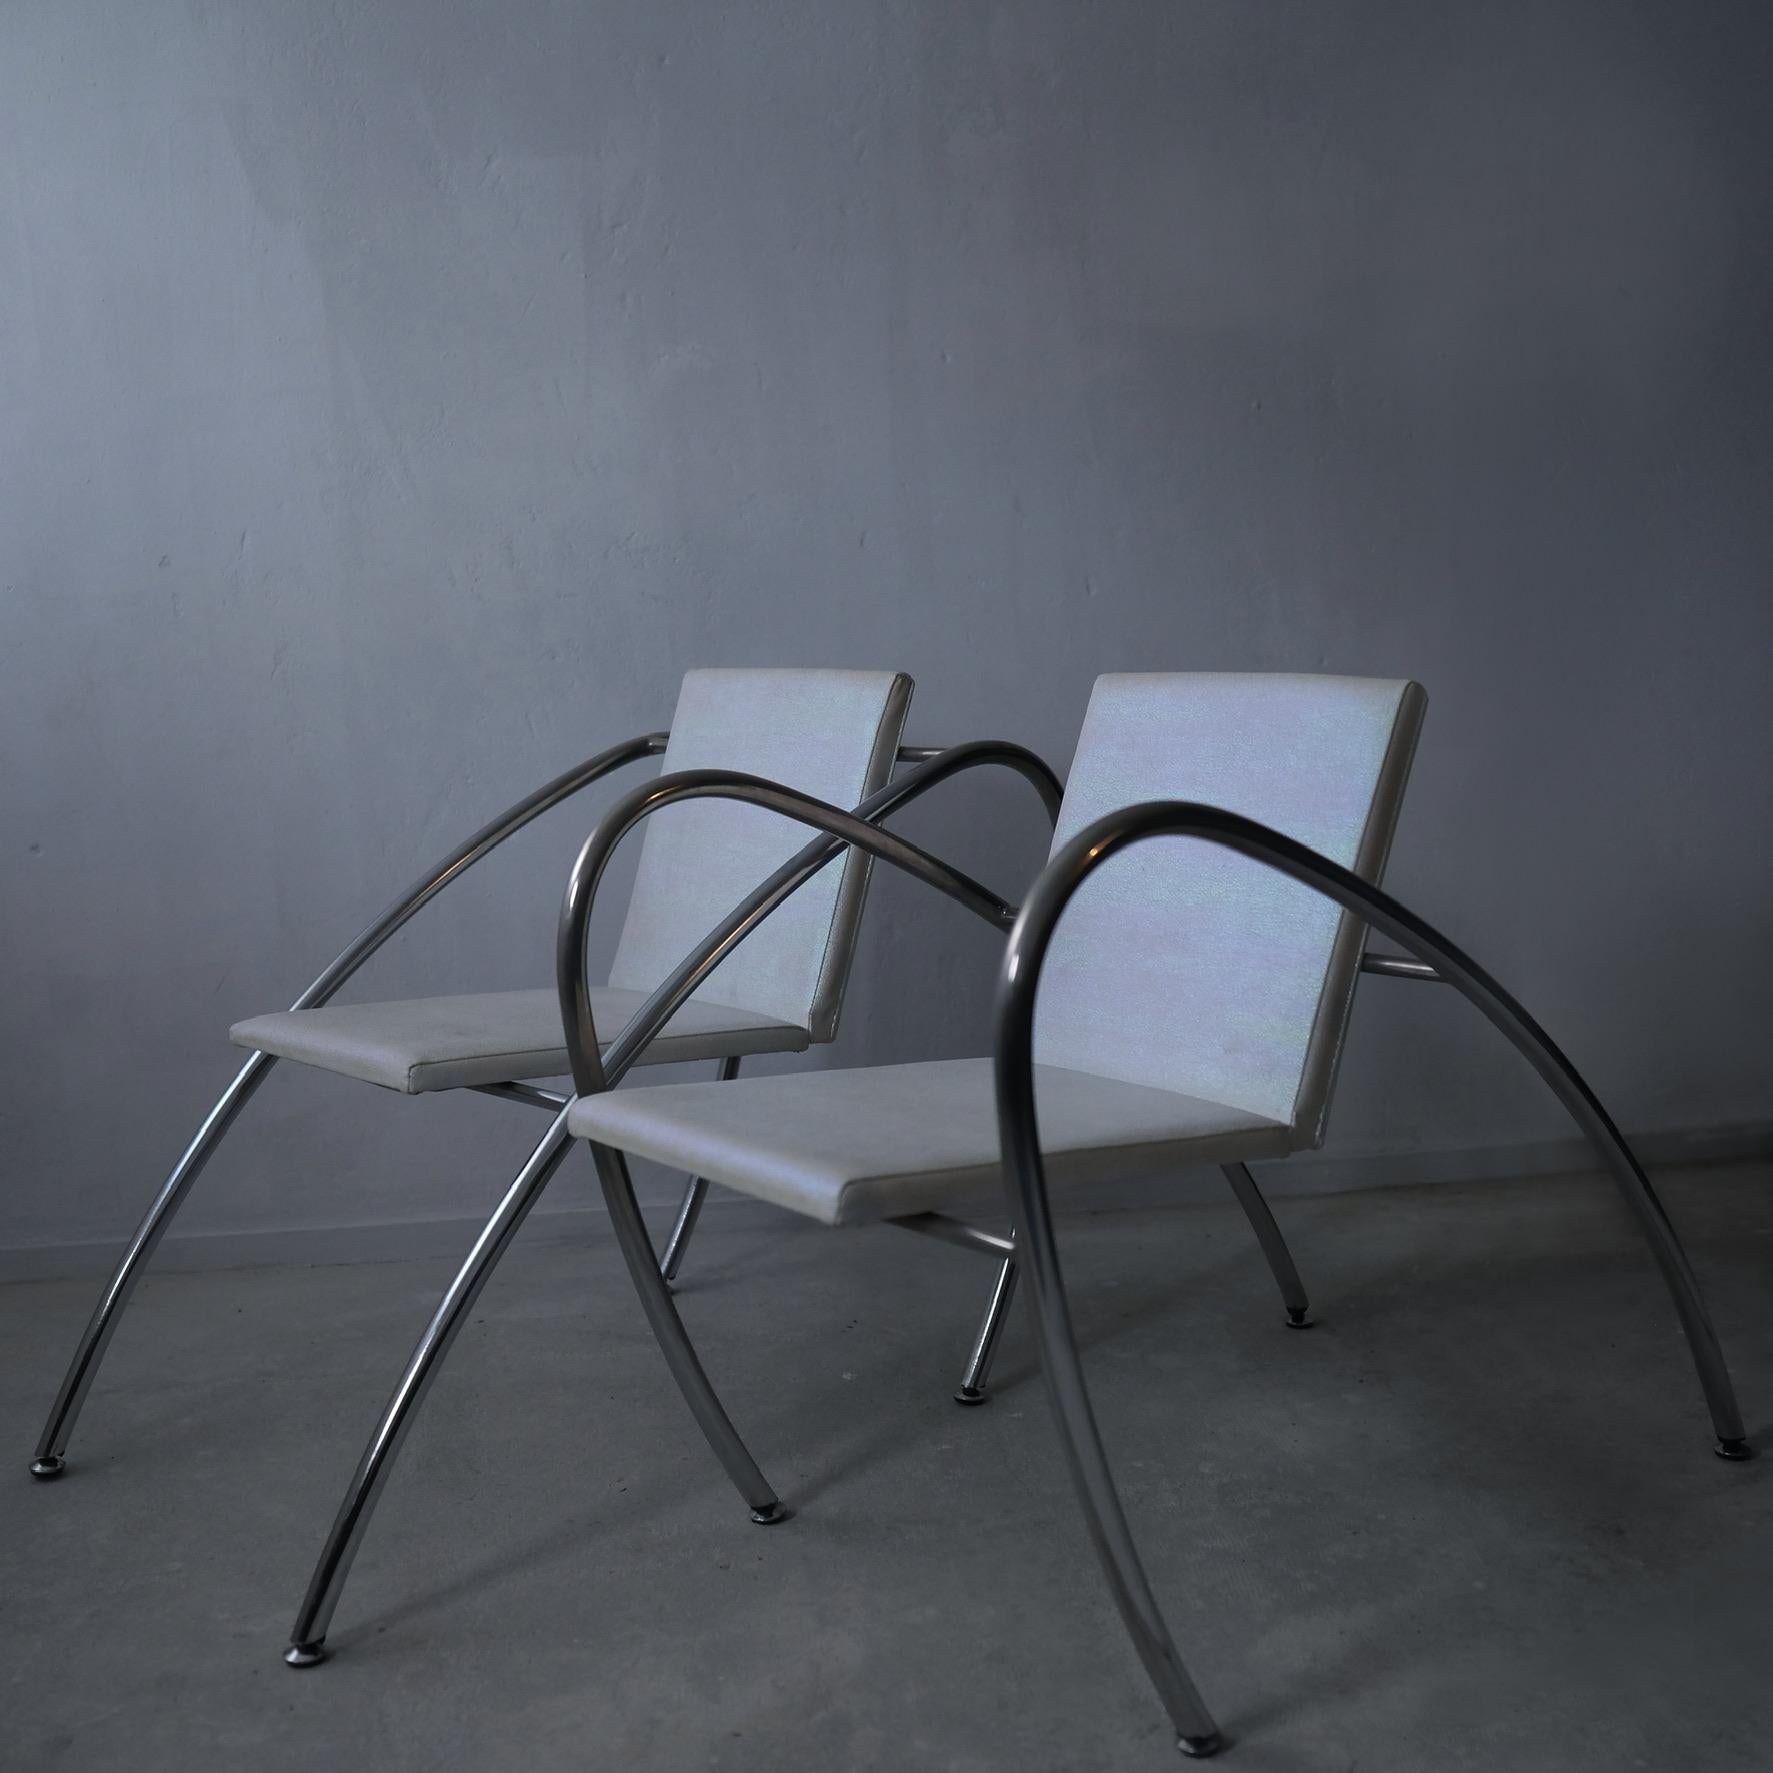 Nemo Editions by Alain Domingo and François Scali Moreno - Marini Chairs, set of two. France 1983